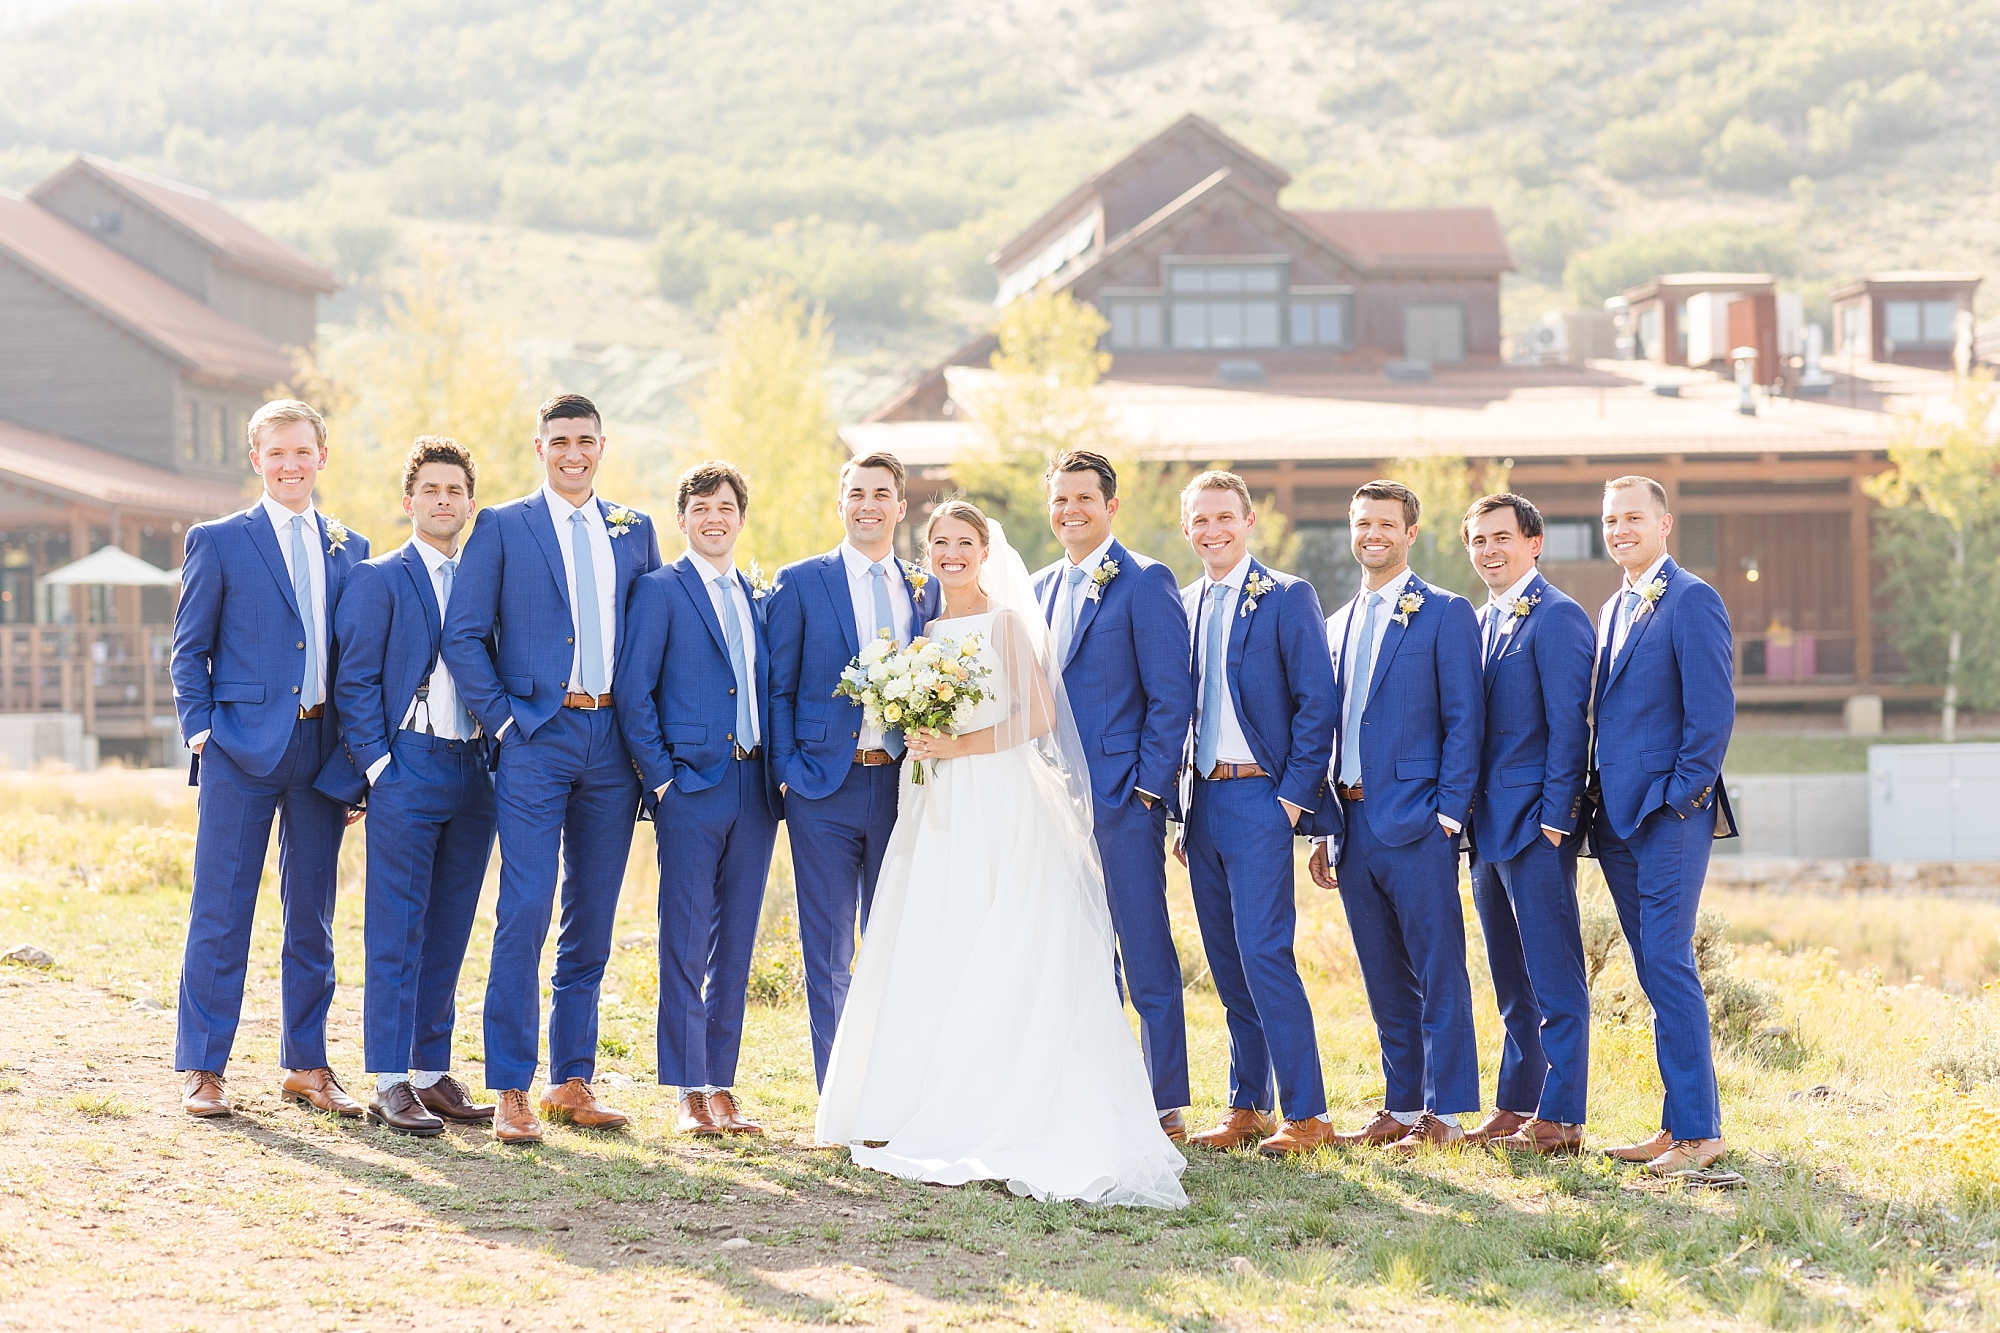 Have your Park City destination wedding at the Lodge at Blue Sky